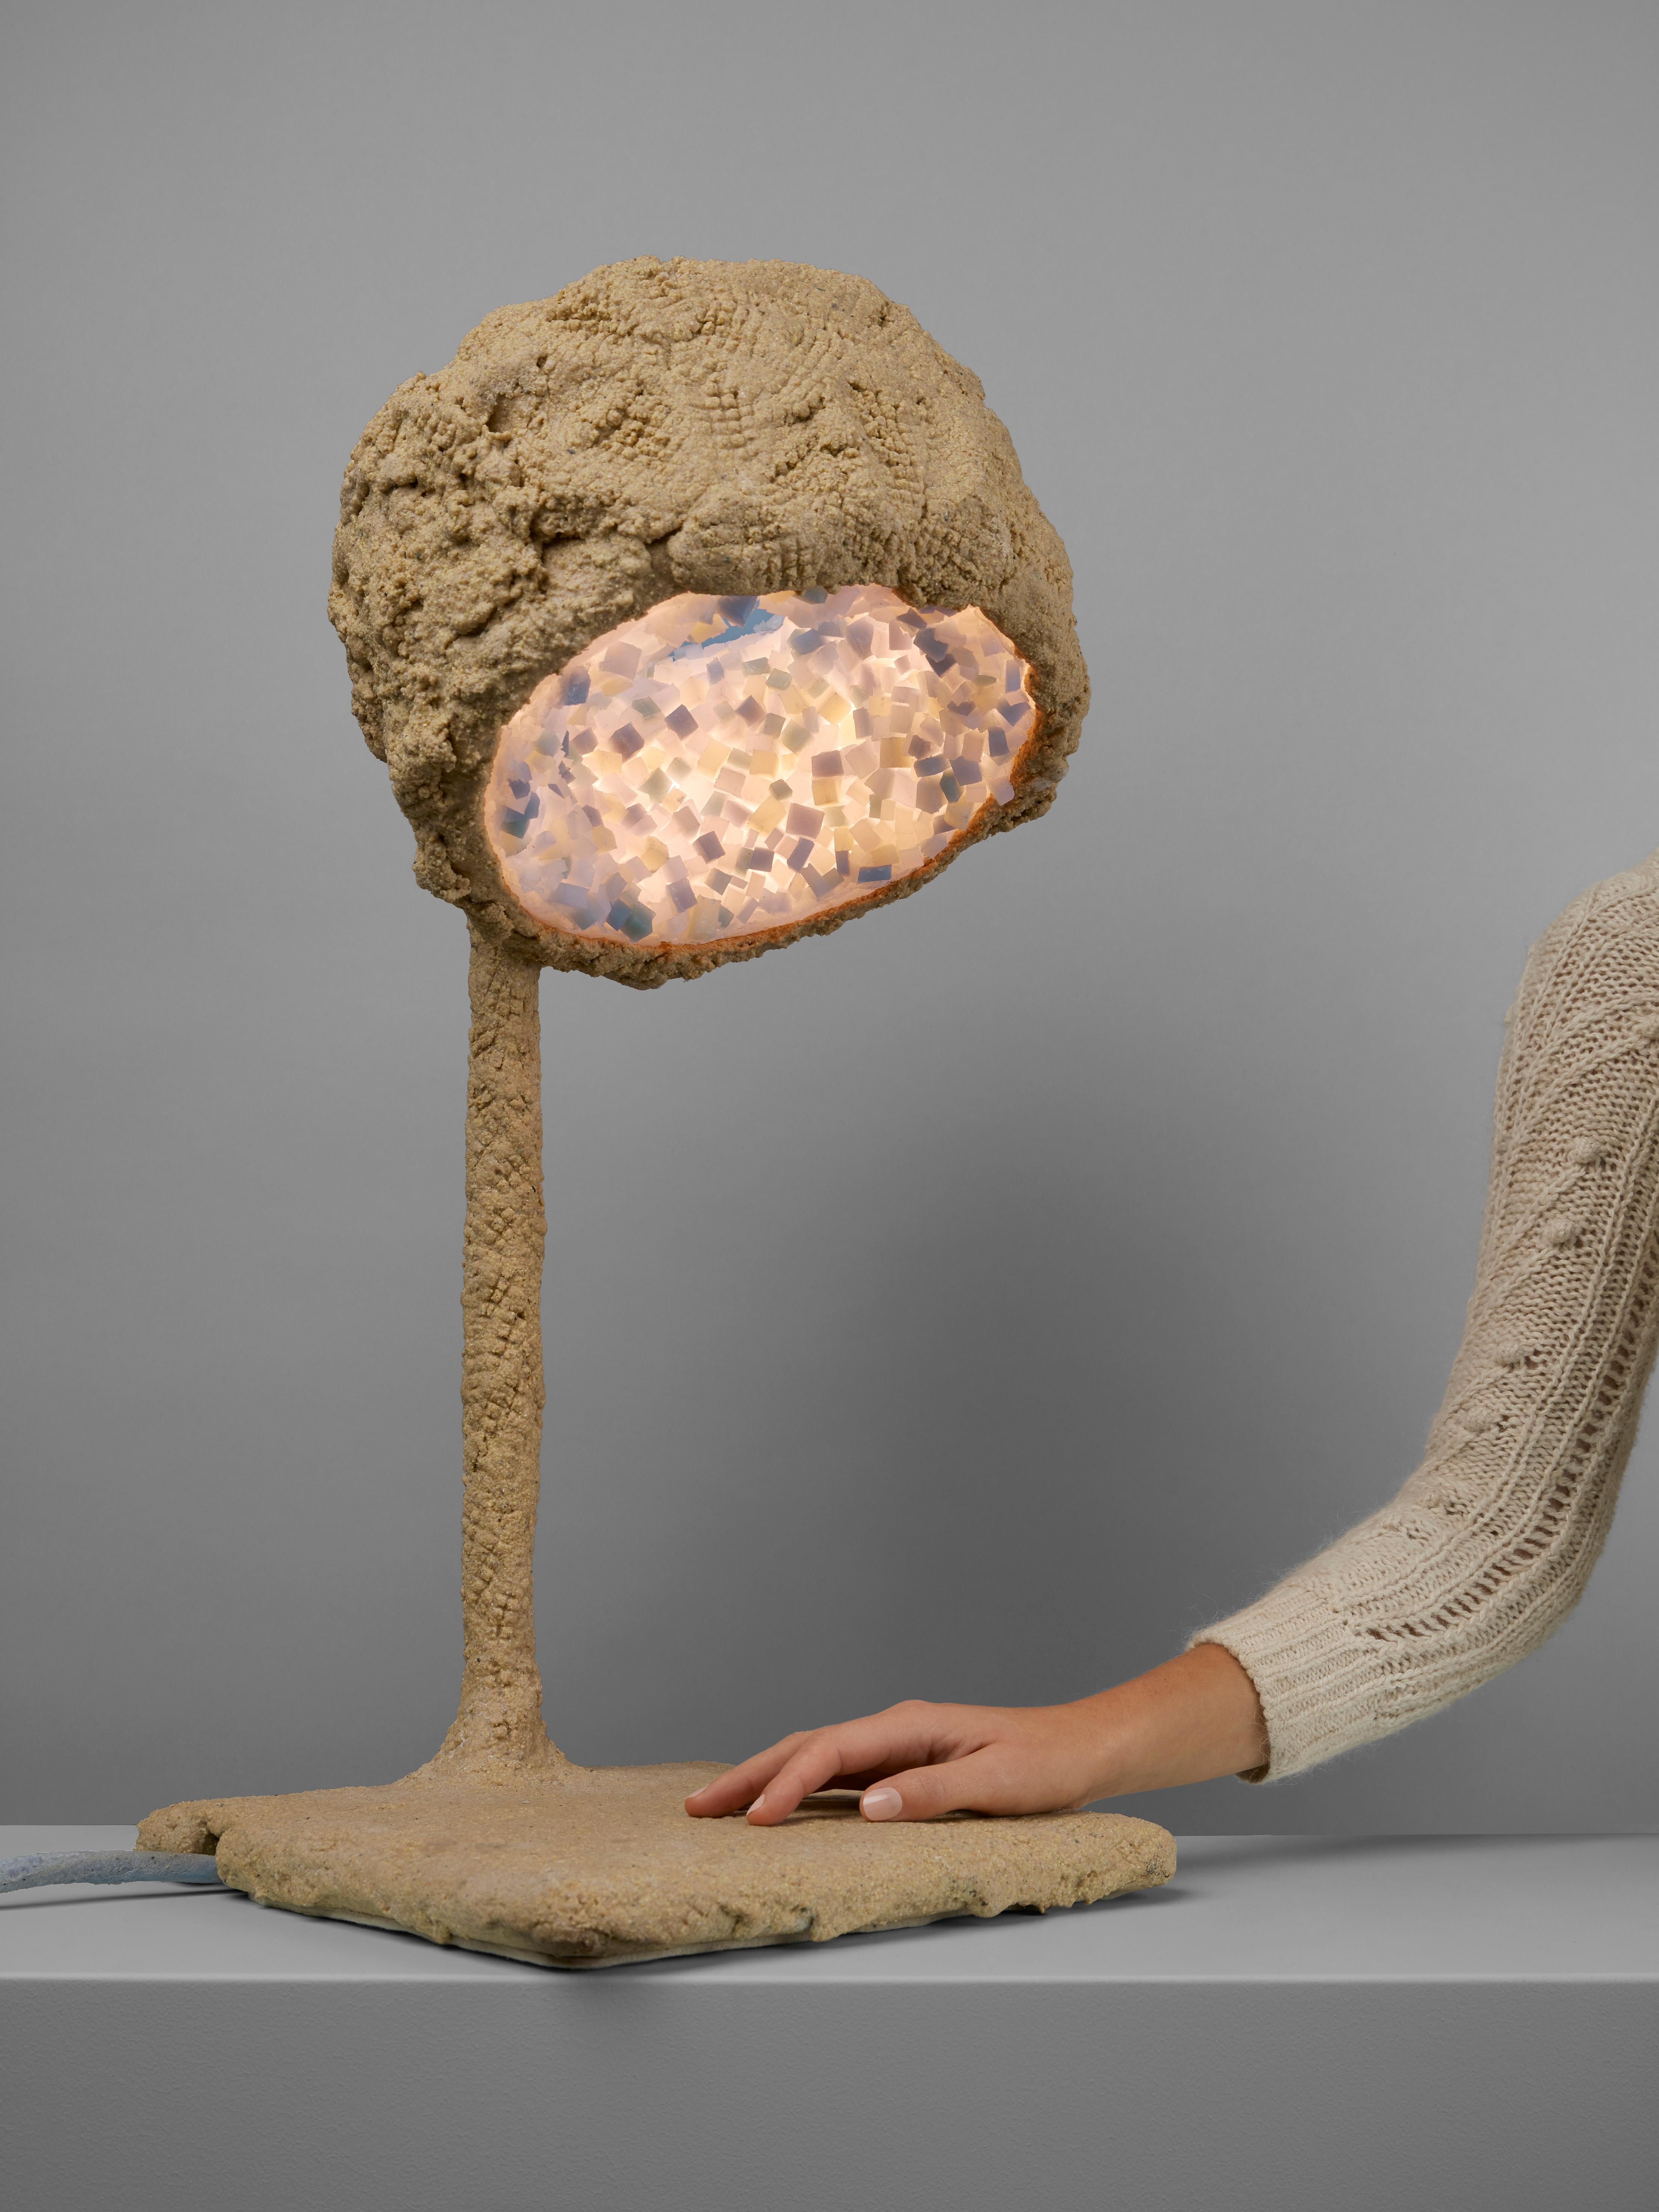 This unique light sculpture is part of Nacho Carbonell’s 'Luciferase' series exclusively produced for Galerie BSL since 2011. Historically, 'Luciferase' is Carbonell’s first work incorporating light. “The root of this word luciferase is ‘carrier of